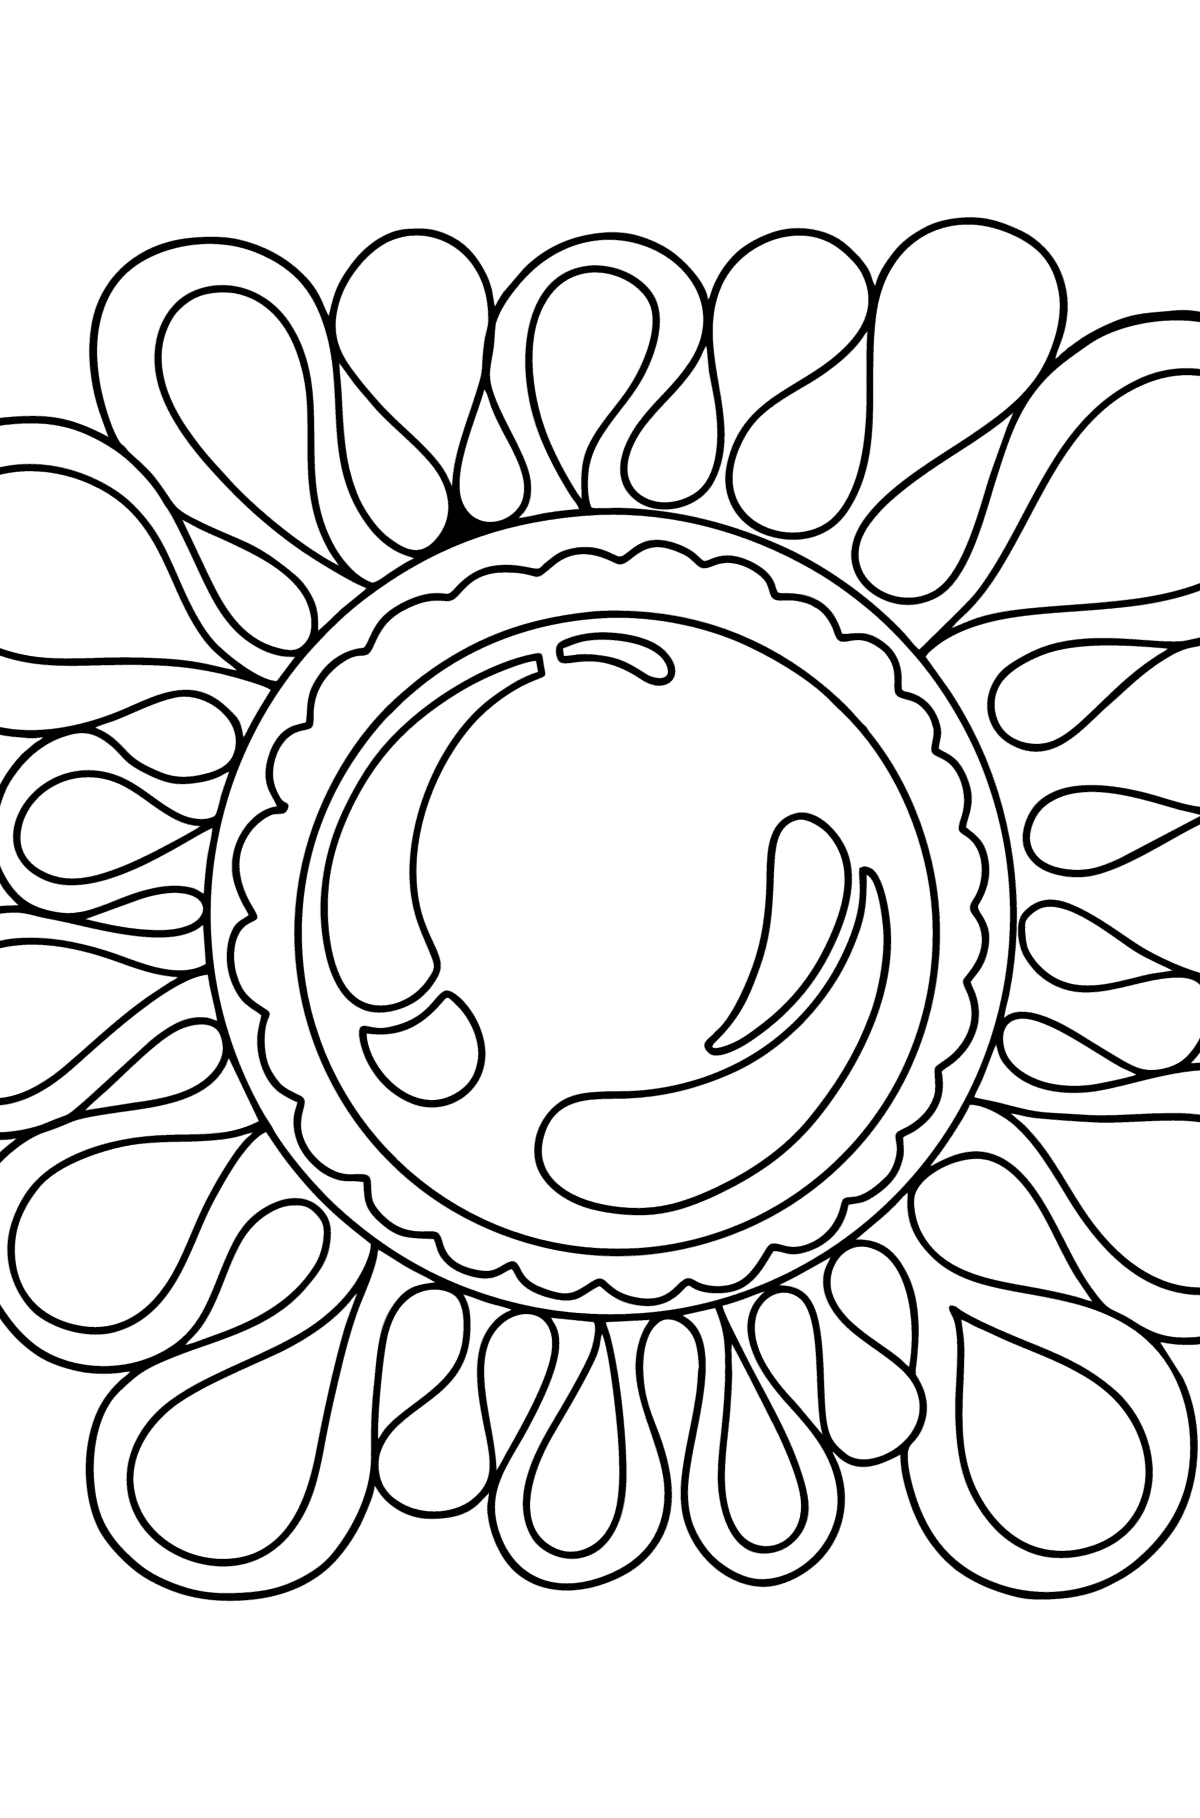 Zentangle Mirror coloring page - Coloring Pages for Kids